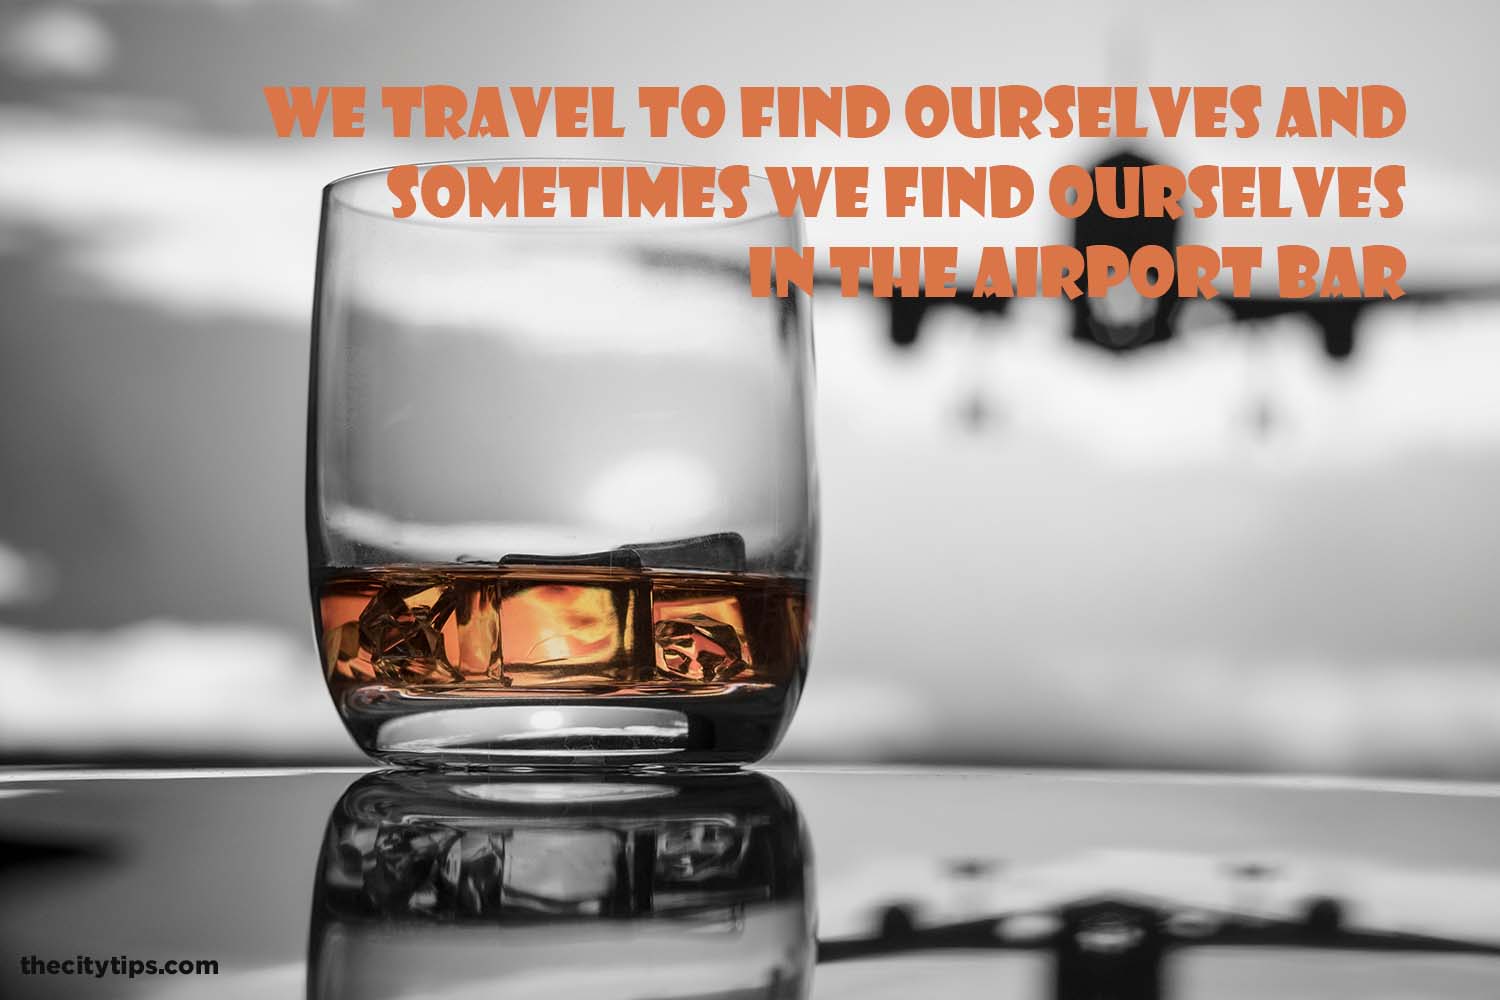 "We travel to find ourselves and sometimes we find ourselves in the airport bar."